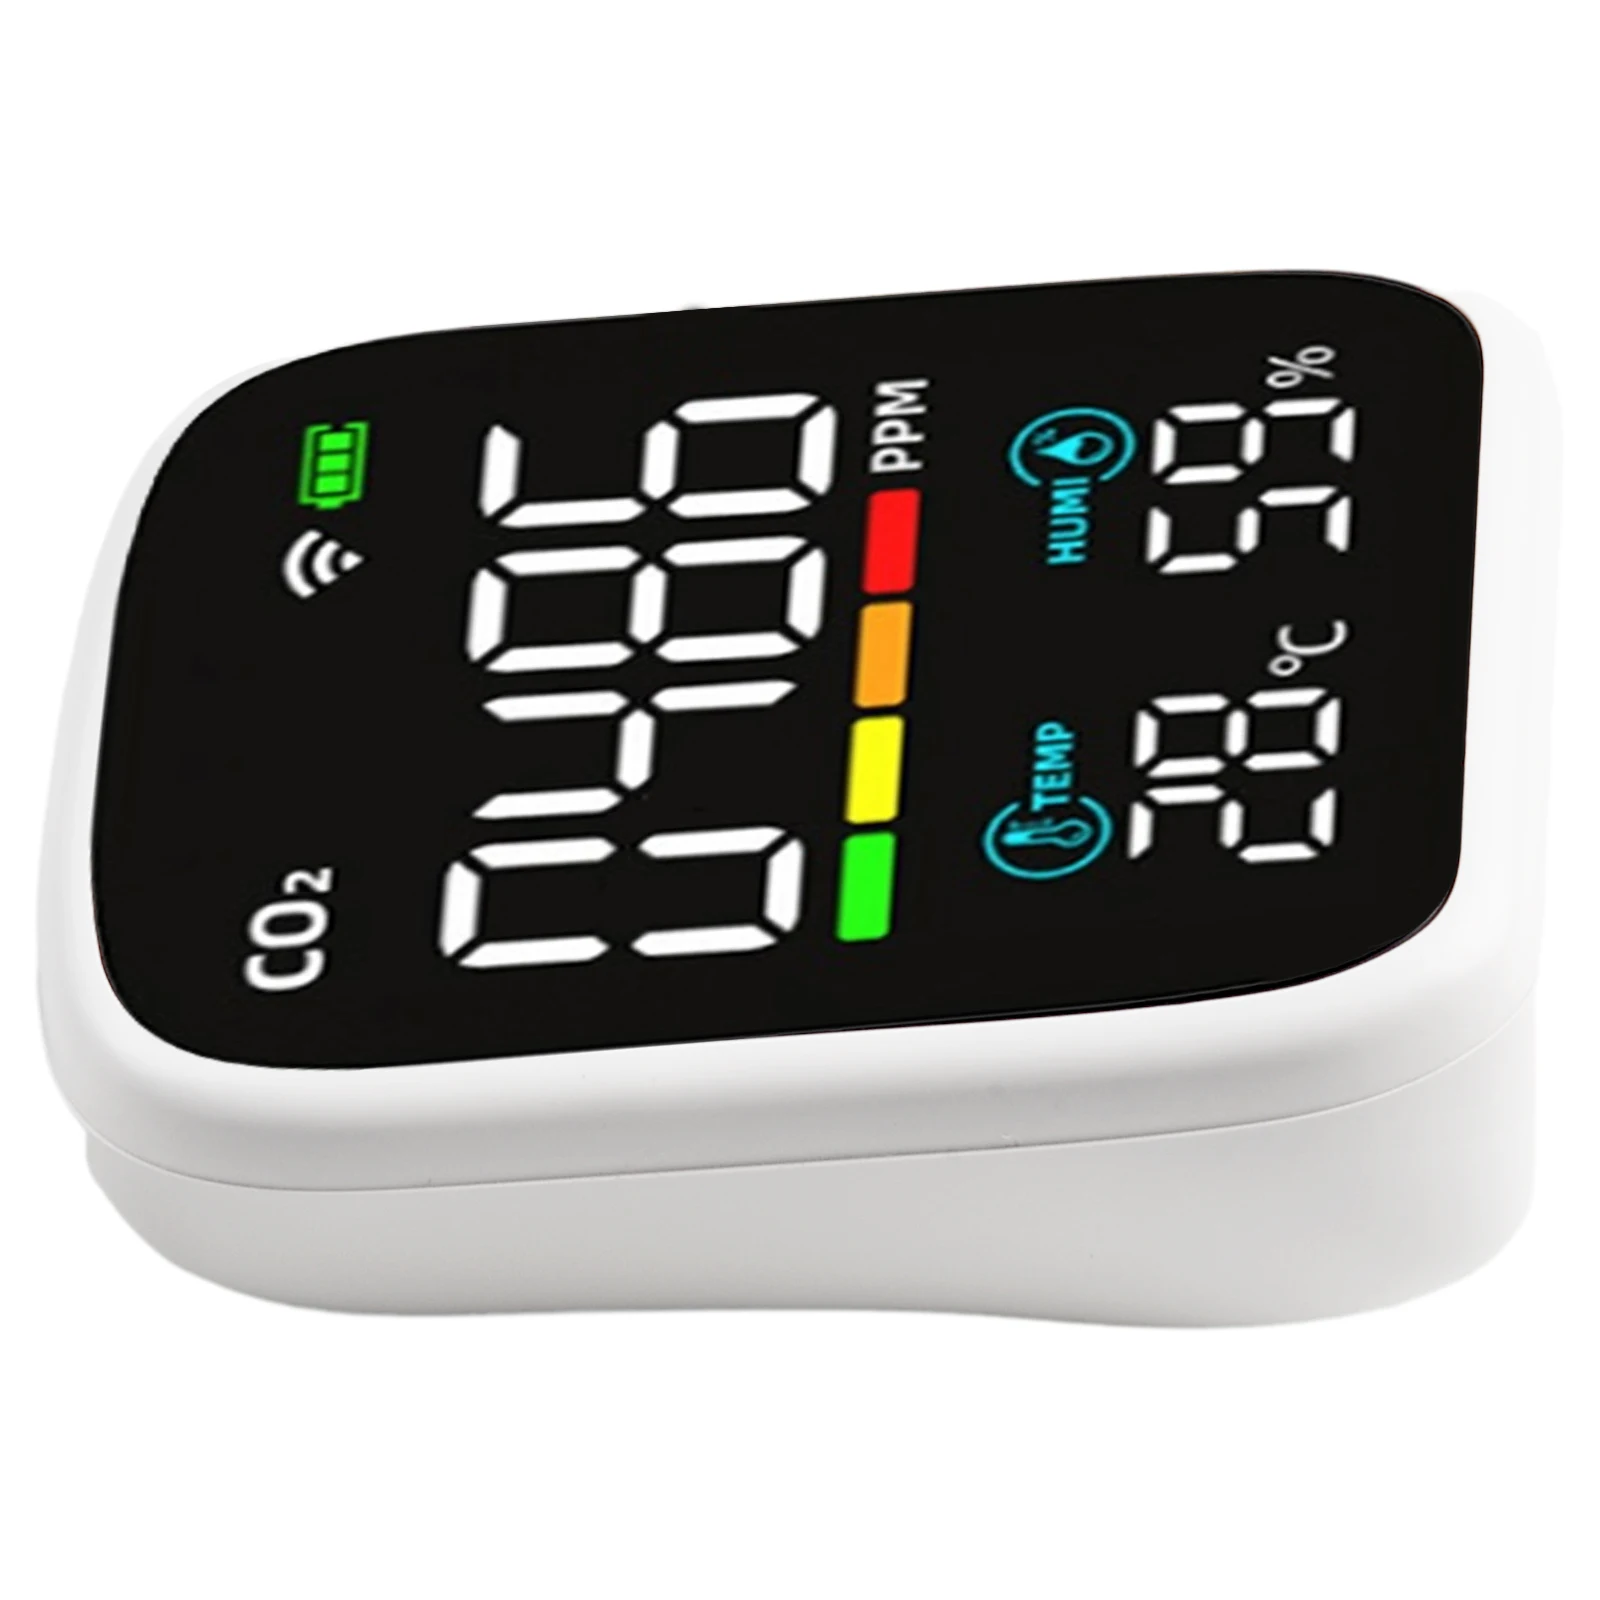 

Portable WIFI carbon dioxide detector with automatic alarm data logging and mobile app integration for easy monitoring